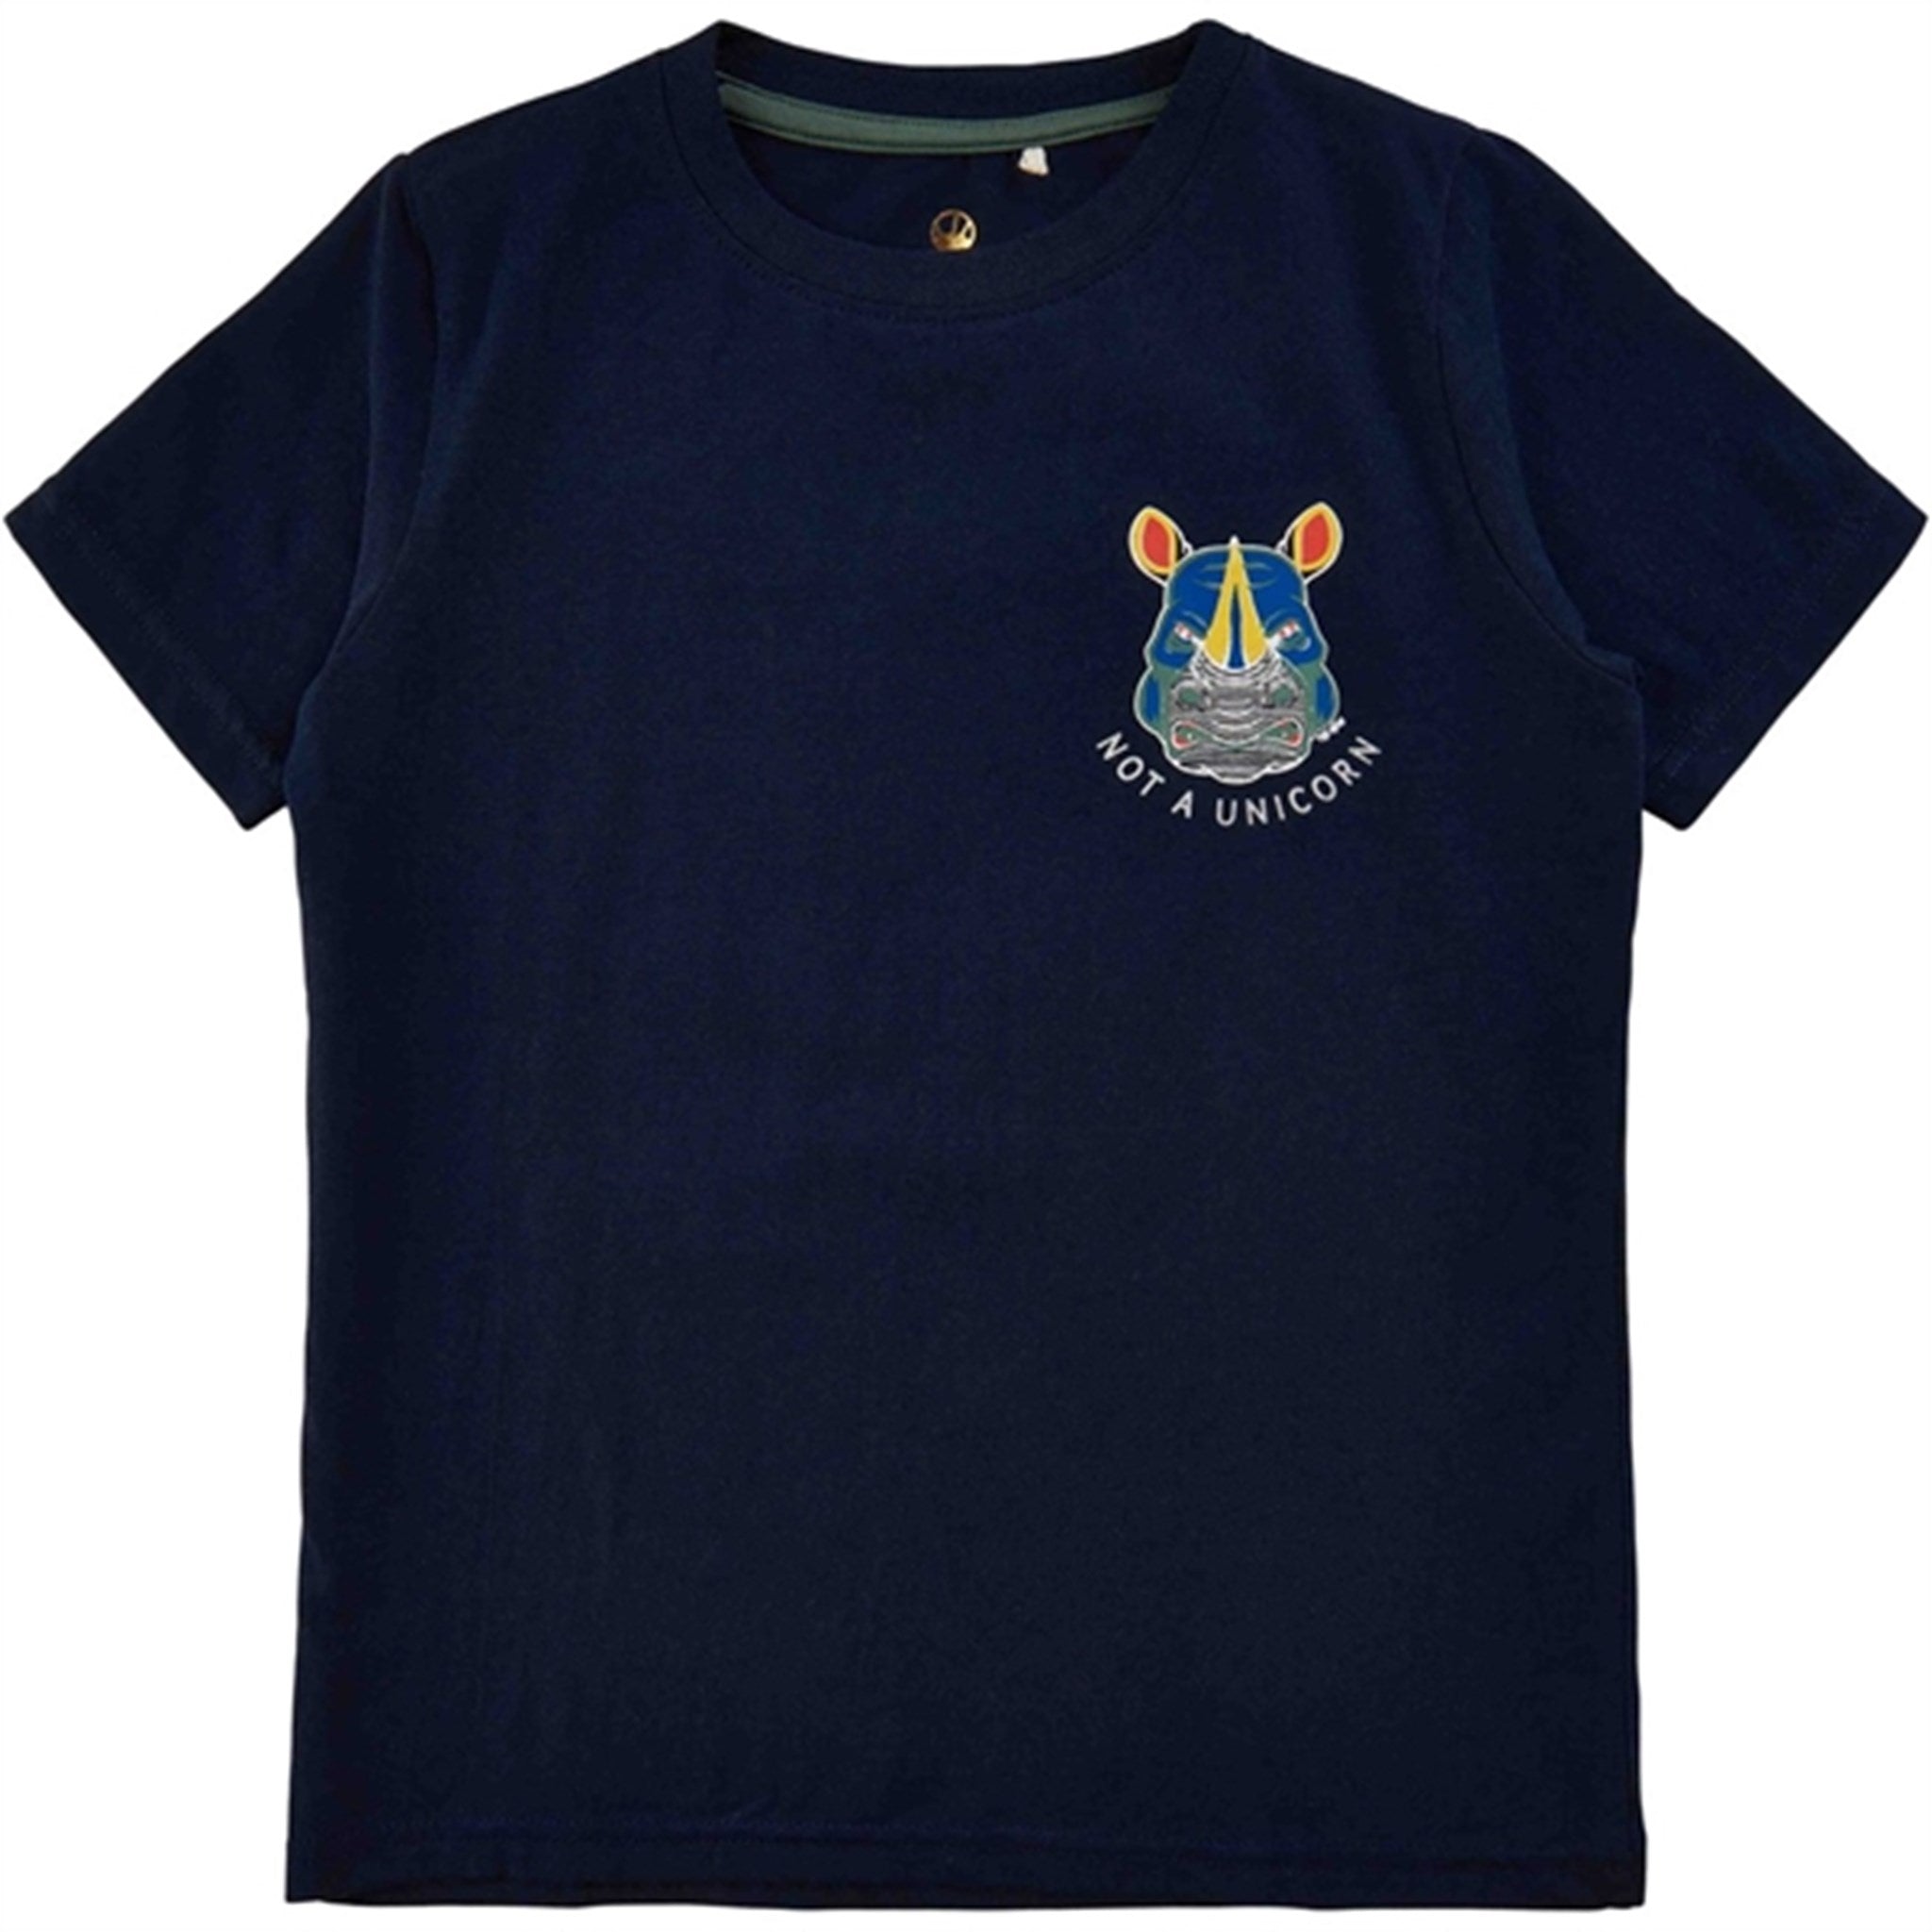 THE NEW Navy Blazer Frons T-shirt